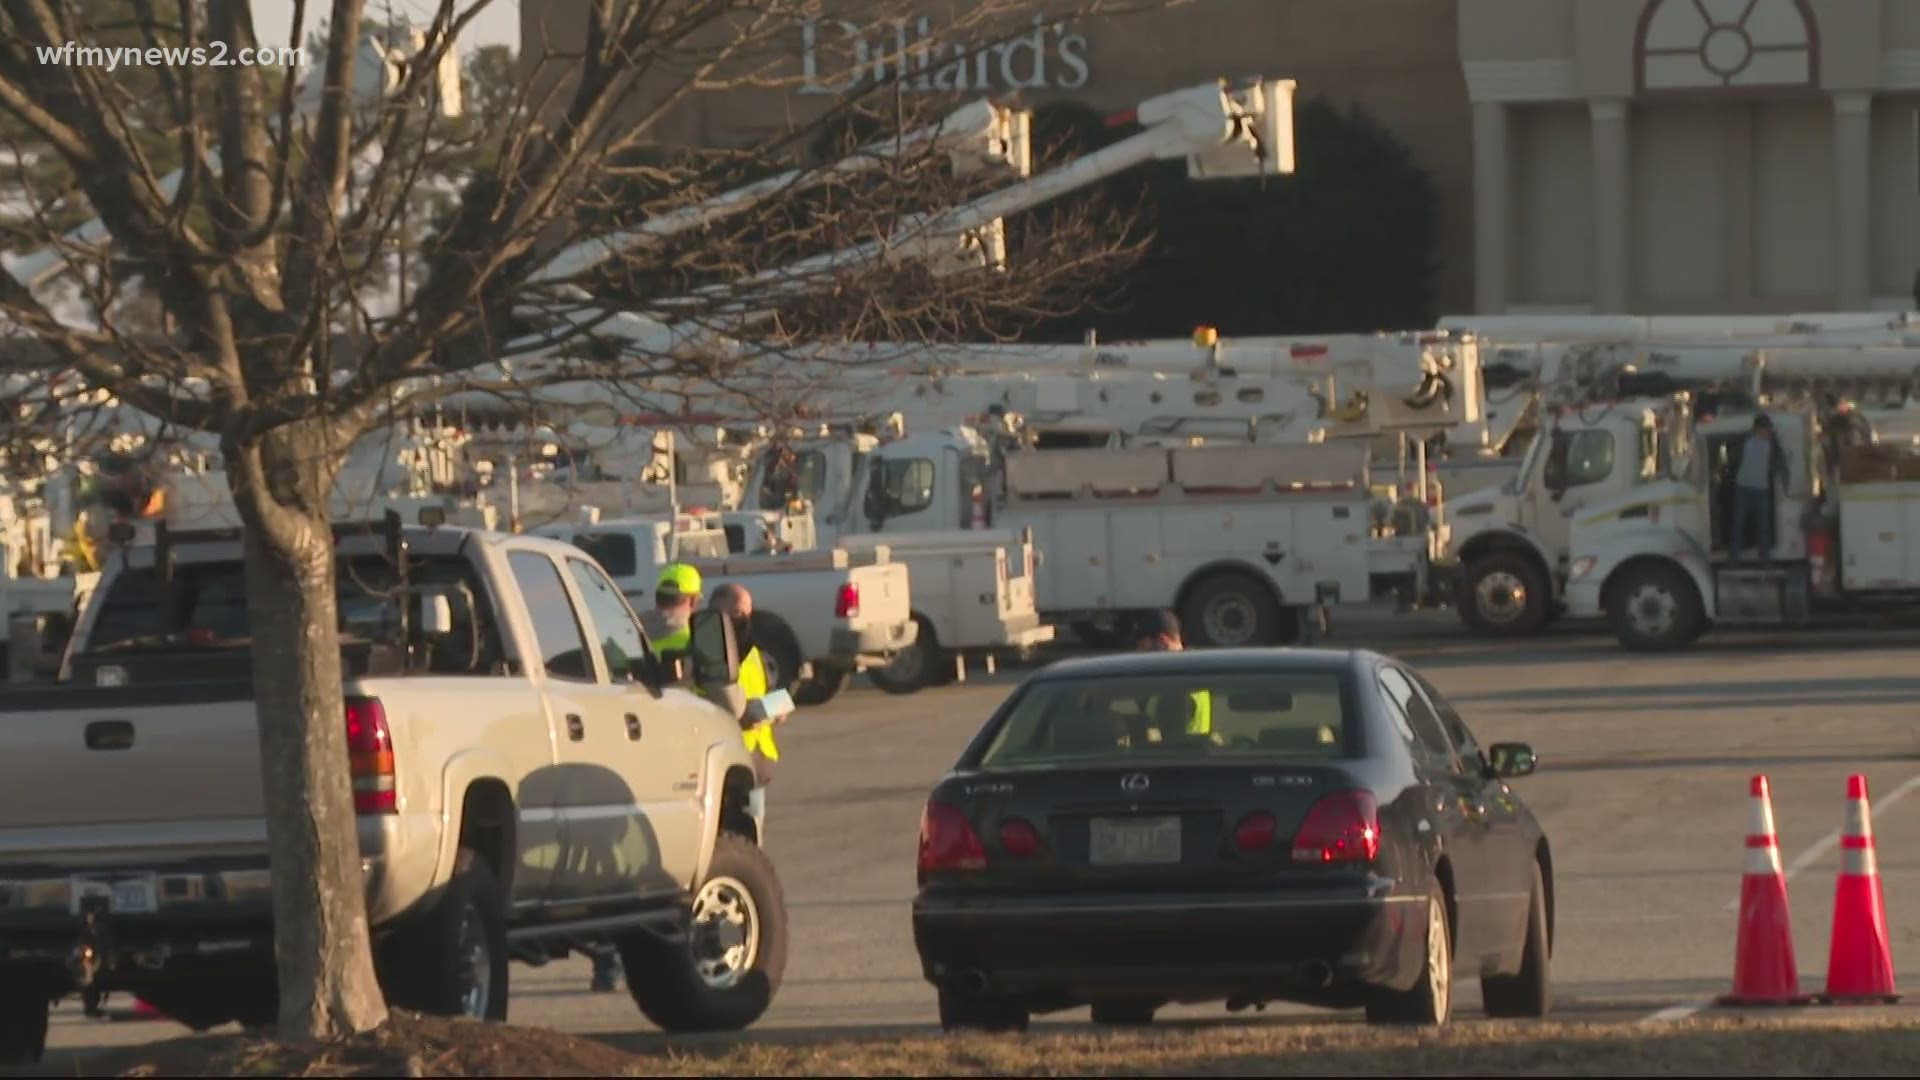 There are about 300-line workers who already service the Triad but more crews are ready to help.